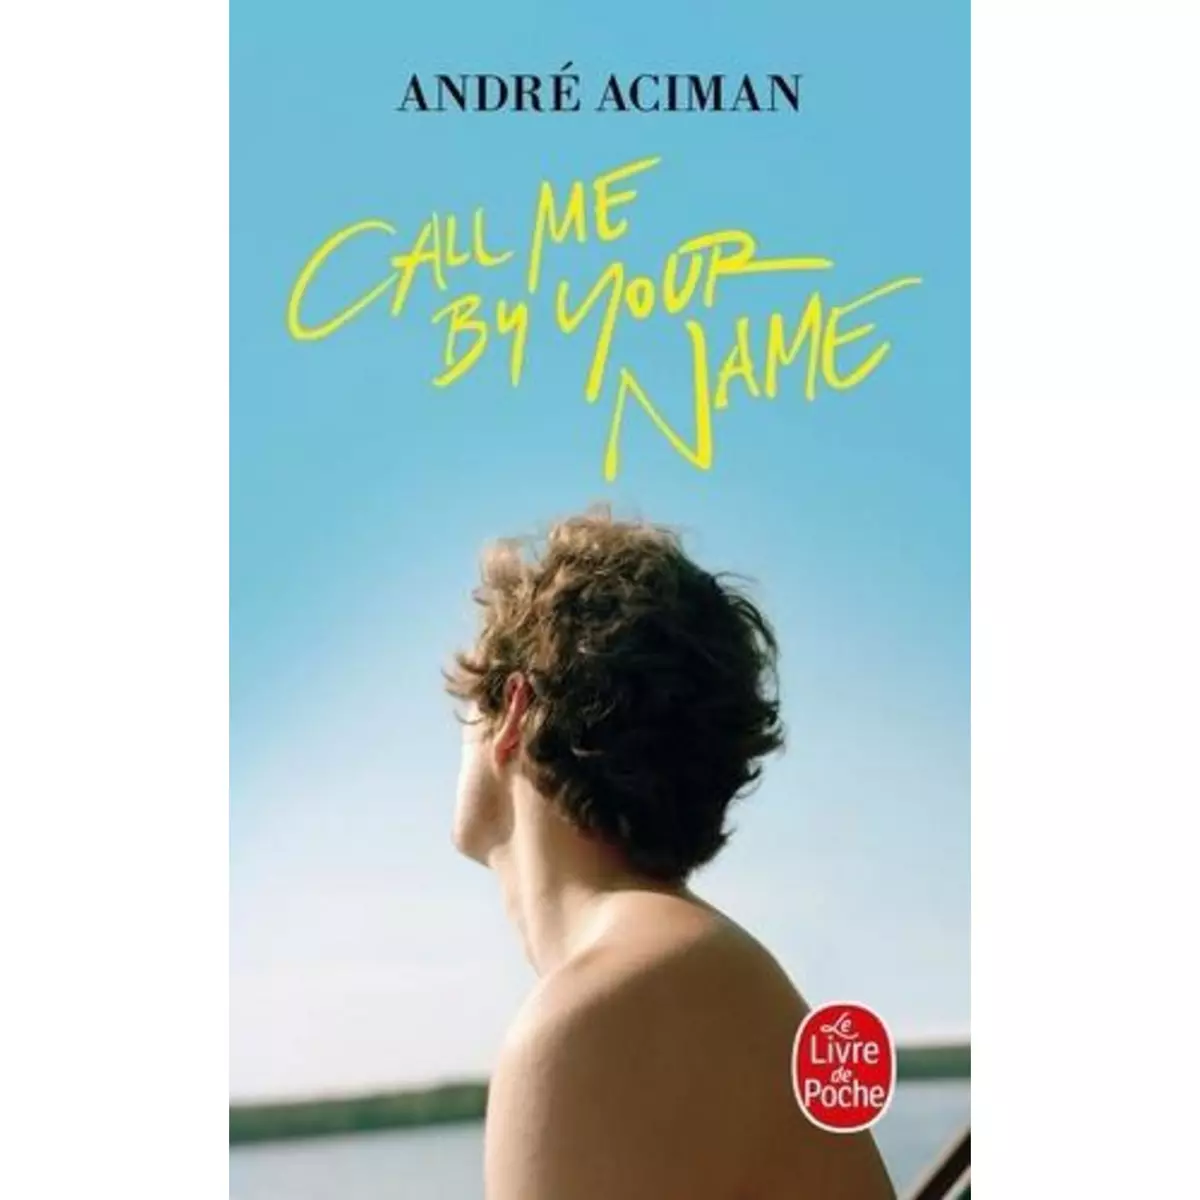  CALL ME BY YOUR NAME, Aciman André